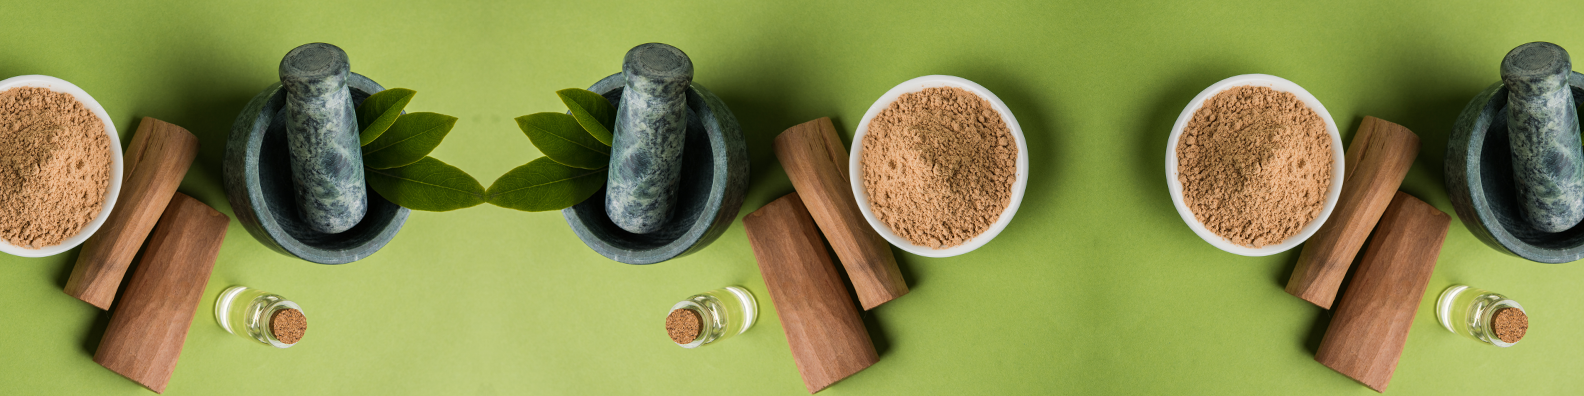 The Difference Between Sandalwood Oil and Sandalwood Powder. Which Is Better?